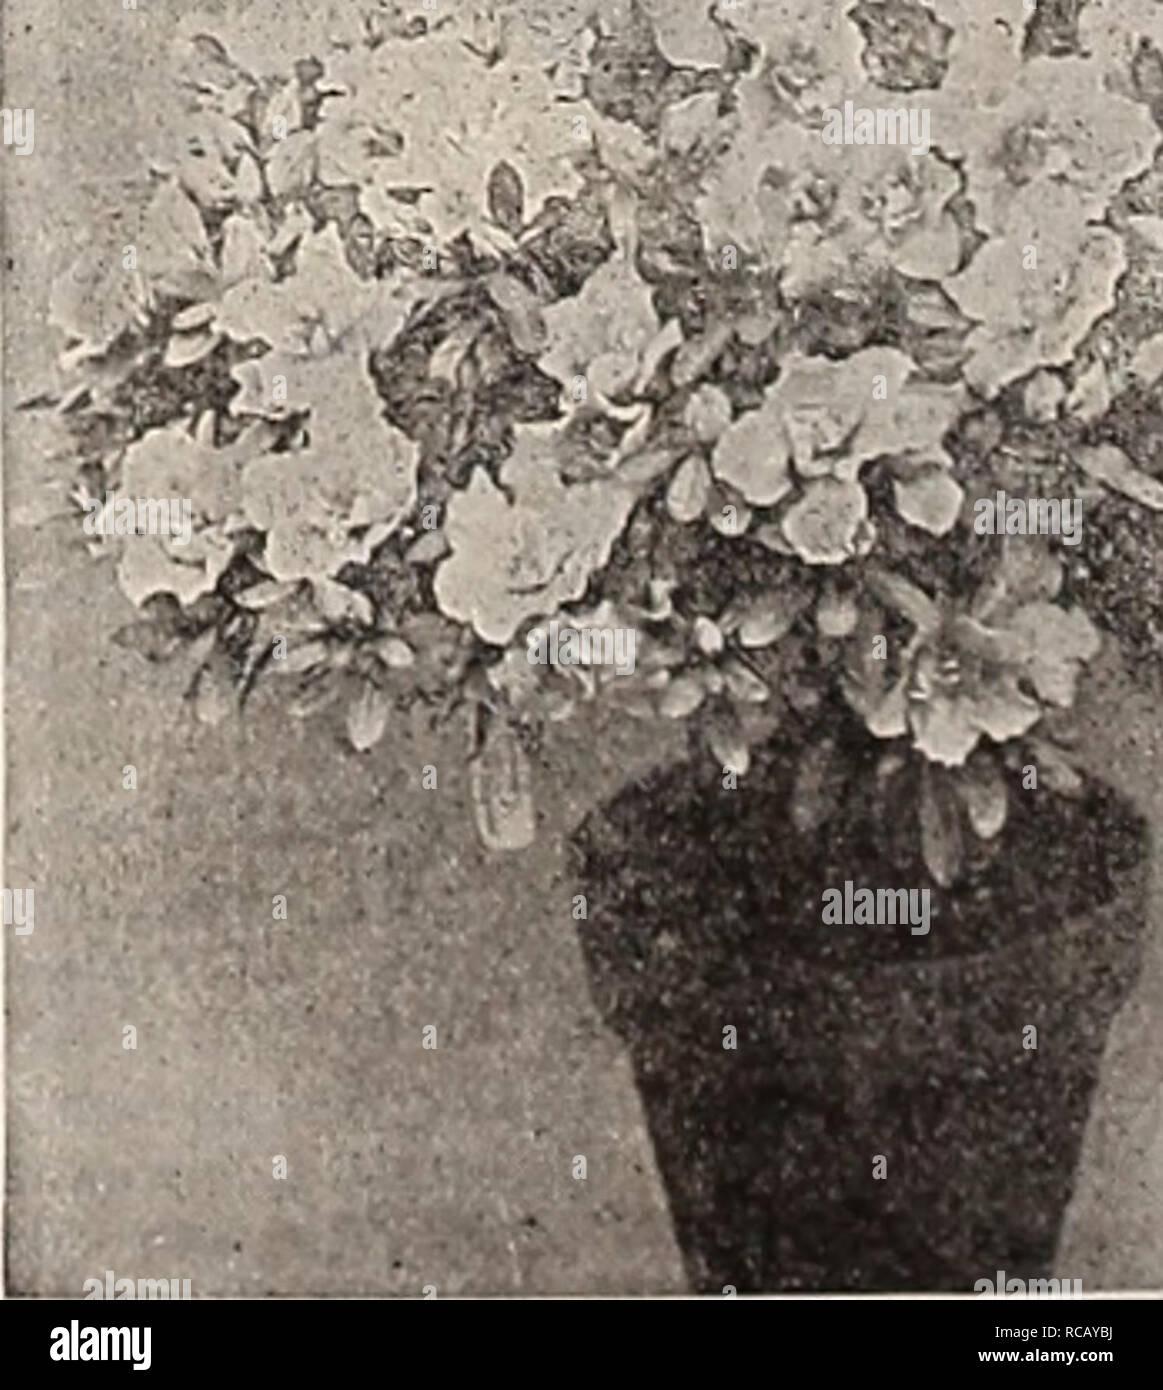 . Dreer's autumn catalogue of bulbs plants seeds etc. for autumn planting 1909. Bulbs (Plants) Catalogs; Flowers Seeds Catalogs; Gardening Equipment and supplies Catalogs; Nurseries (Horticulture) Catalogs; Fruit Seeds Catalogs; Vegetables Seeds Catalogs. 30 to 36 inches 36 to 42 &quot; 48 to 50 &quot; 54 to 60 &quot; HEIGHT OF STEMS. DIAMUTBK OP CROWN. 20 to 24 inches 12 to 14 inches .. 20 to 24 &quot; 14 to lti &quot; .. 22 to 24 &quot; 22 to 24 &quot; .. $ 7 50 each. 10 00 &quot; 12 50 a 15 00 ti 20 00 ii $ 7 50 each. 10 00 &quot; 12 50 a 15 00 t. 20 00 n Begonia Gloire de Lorraine. ARDISIA Stock Photo